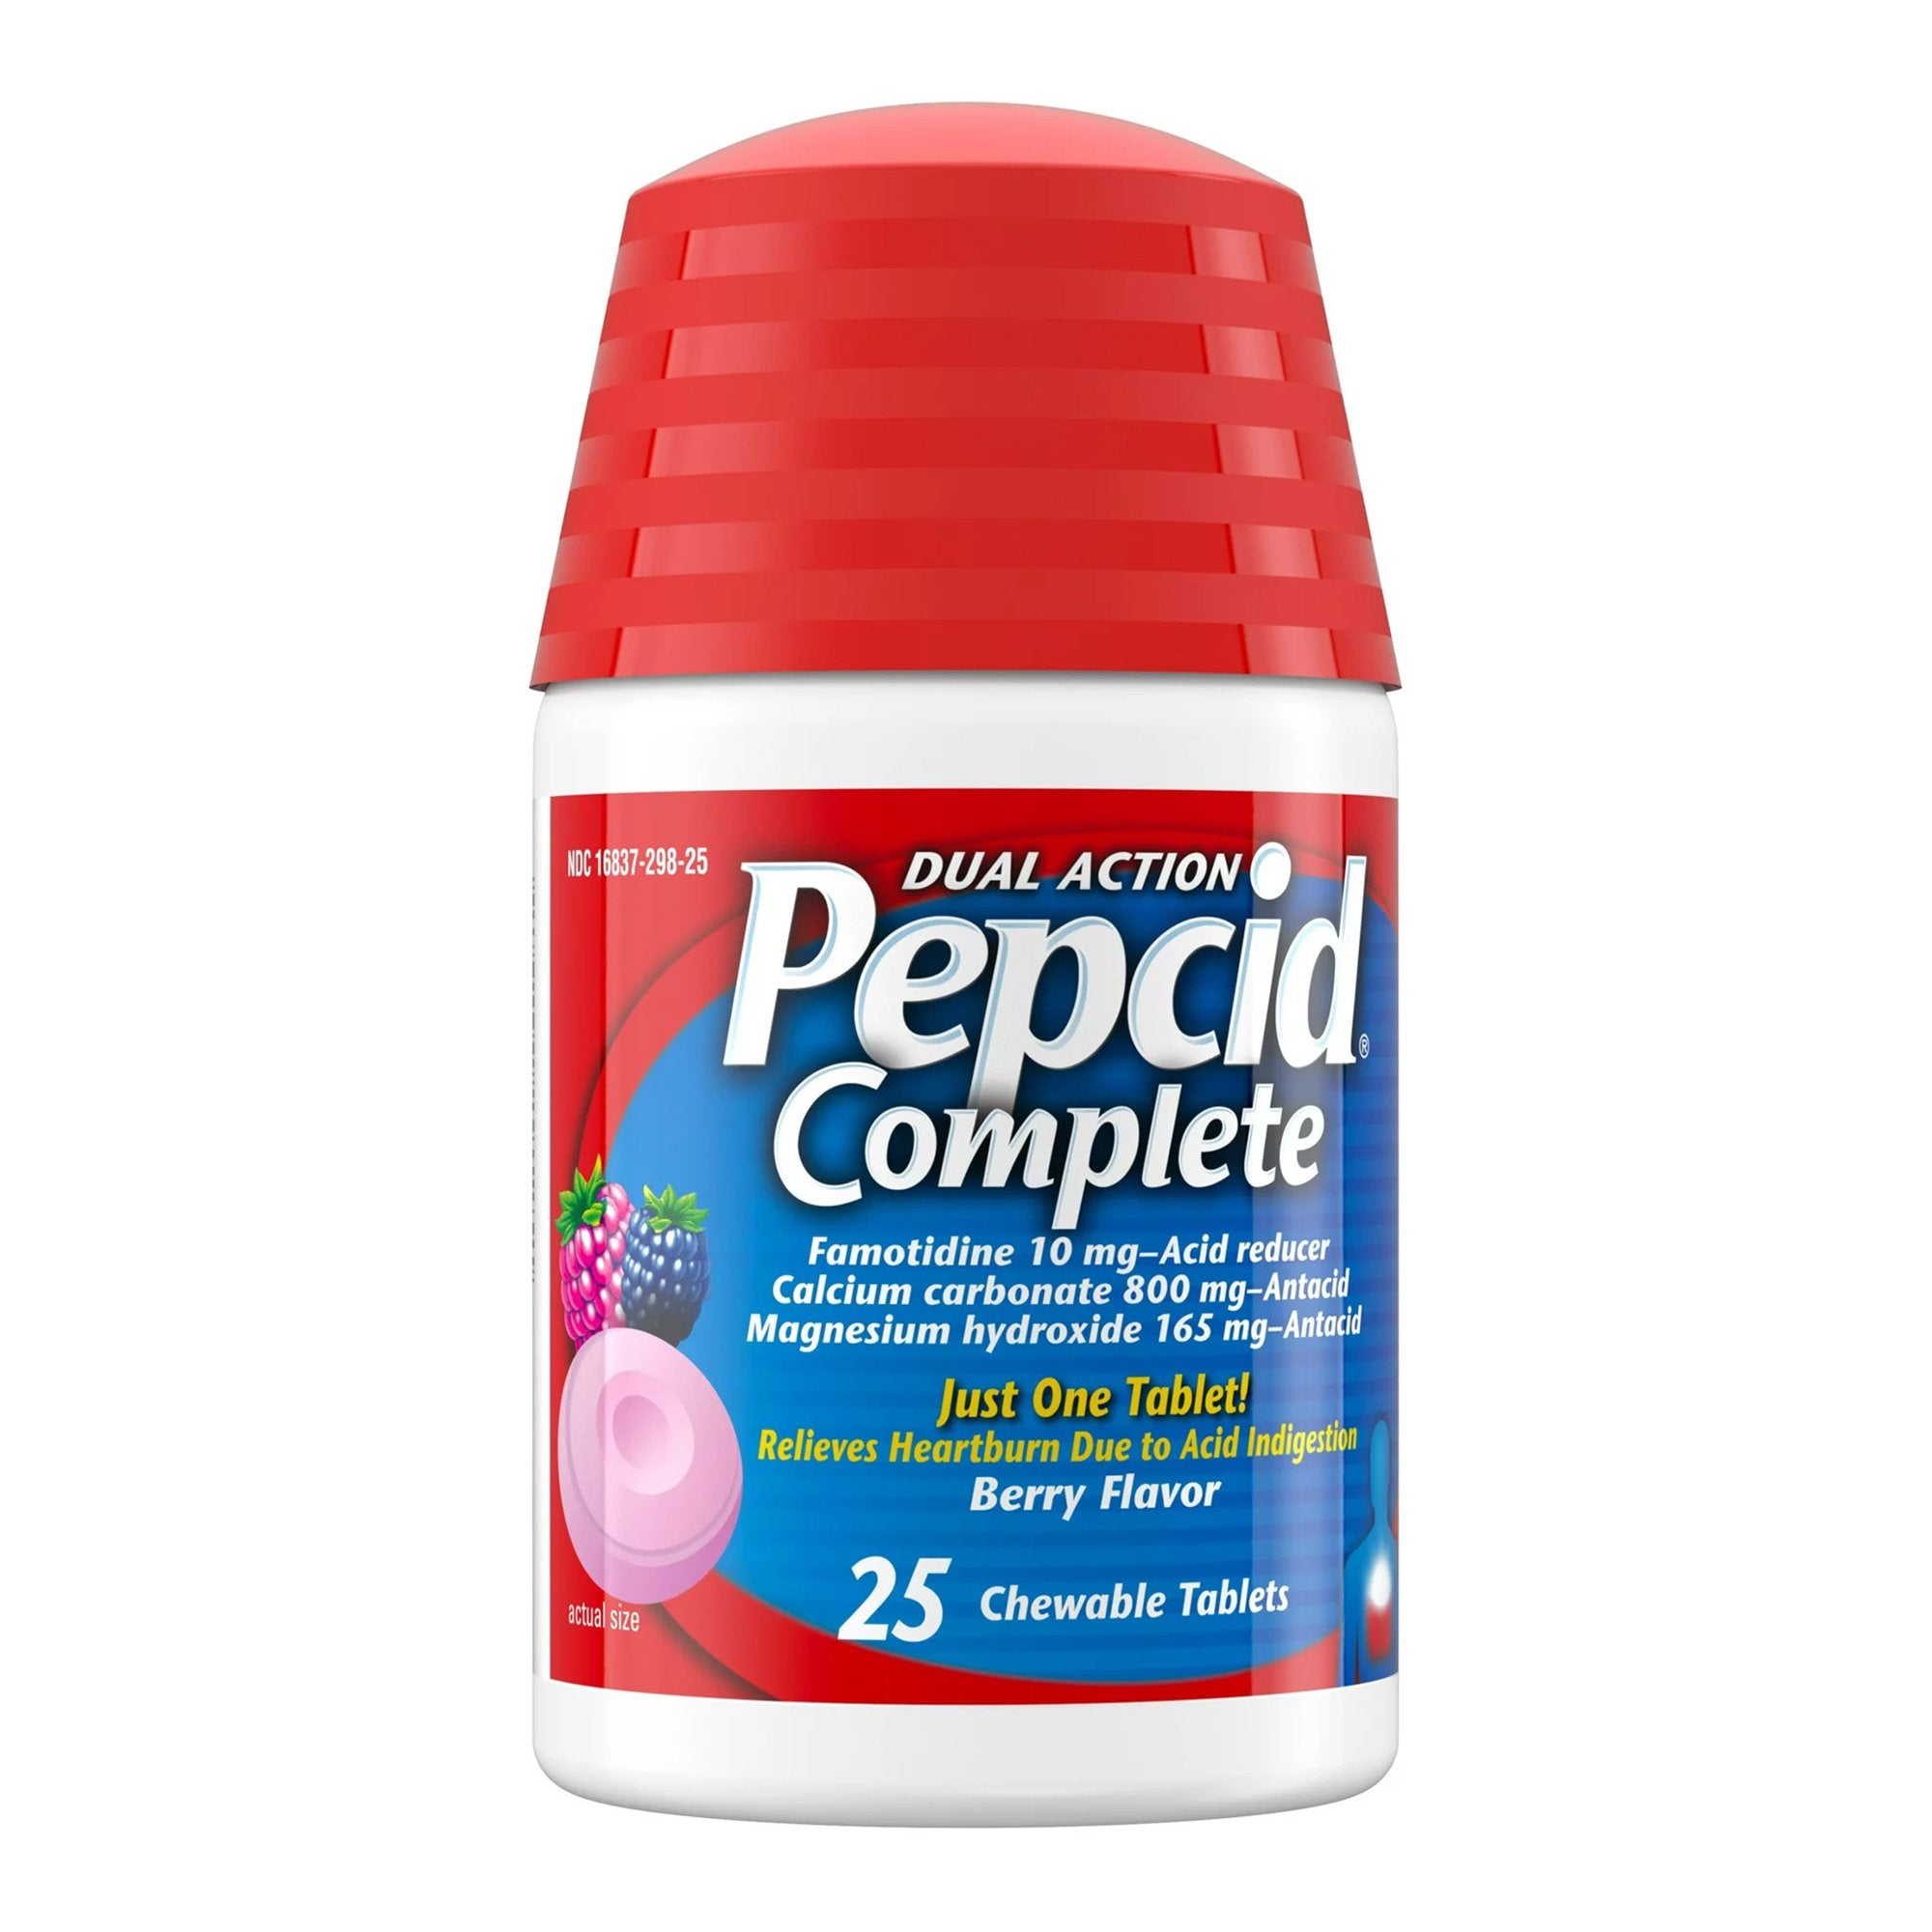 Antacid Pepcid® Complete 800 mg - 165 mg - 10 mg Strength Chewable Tablet 25 per Bottle